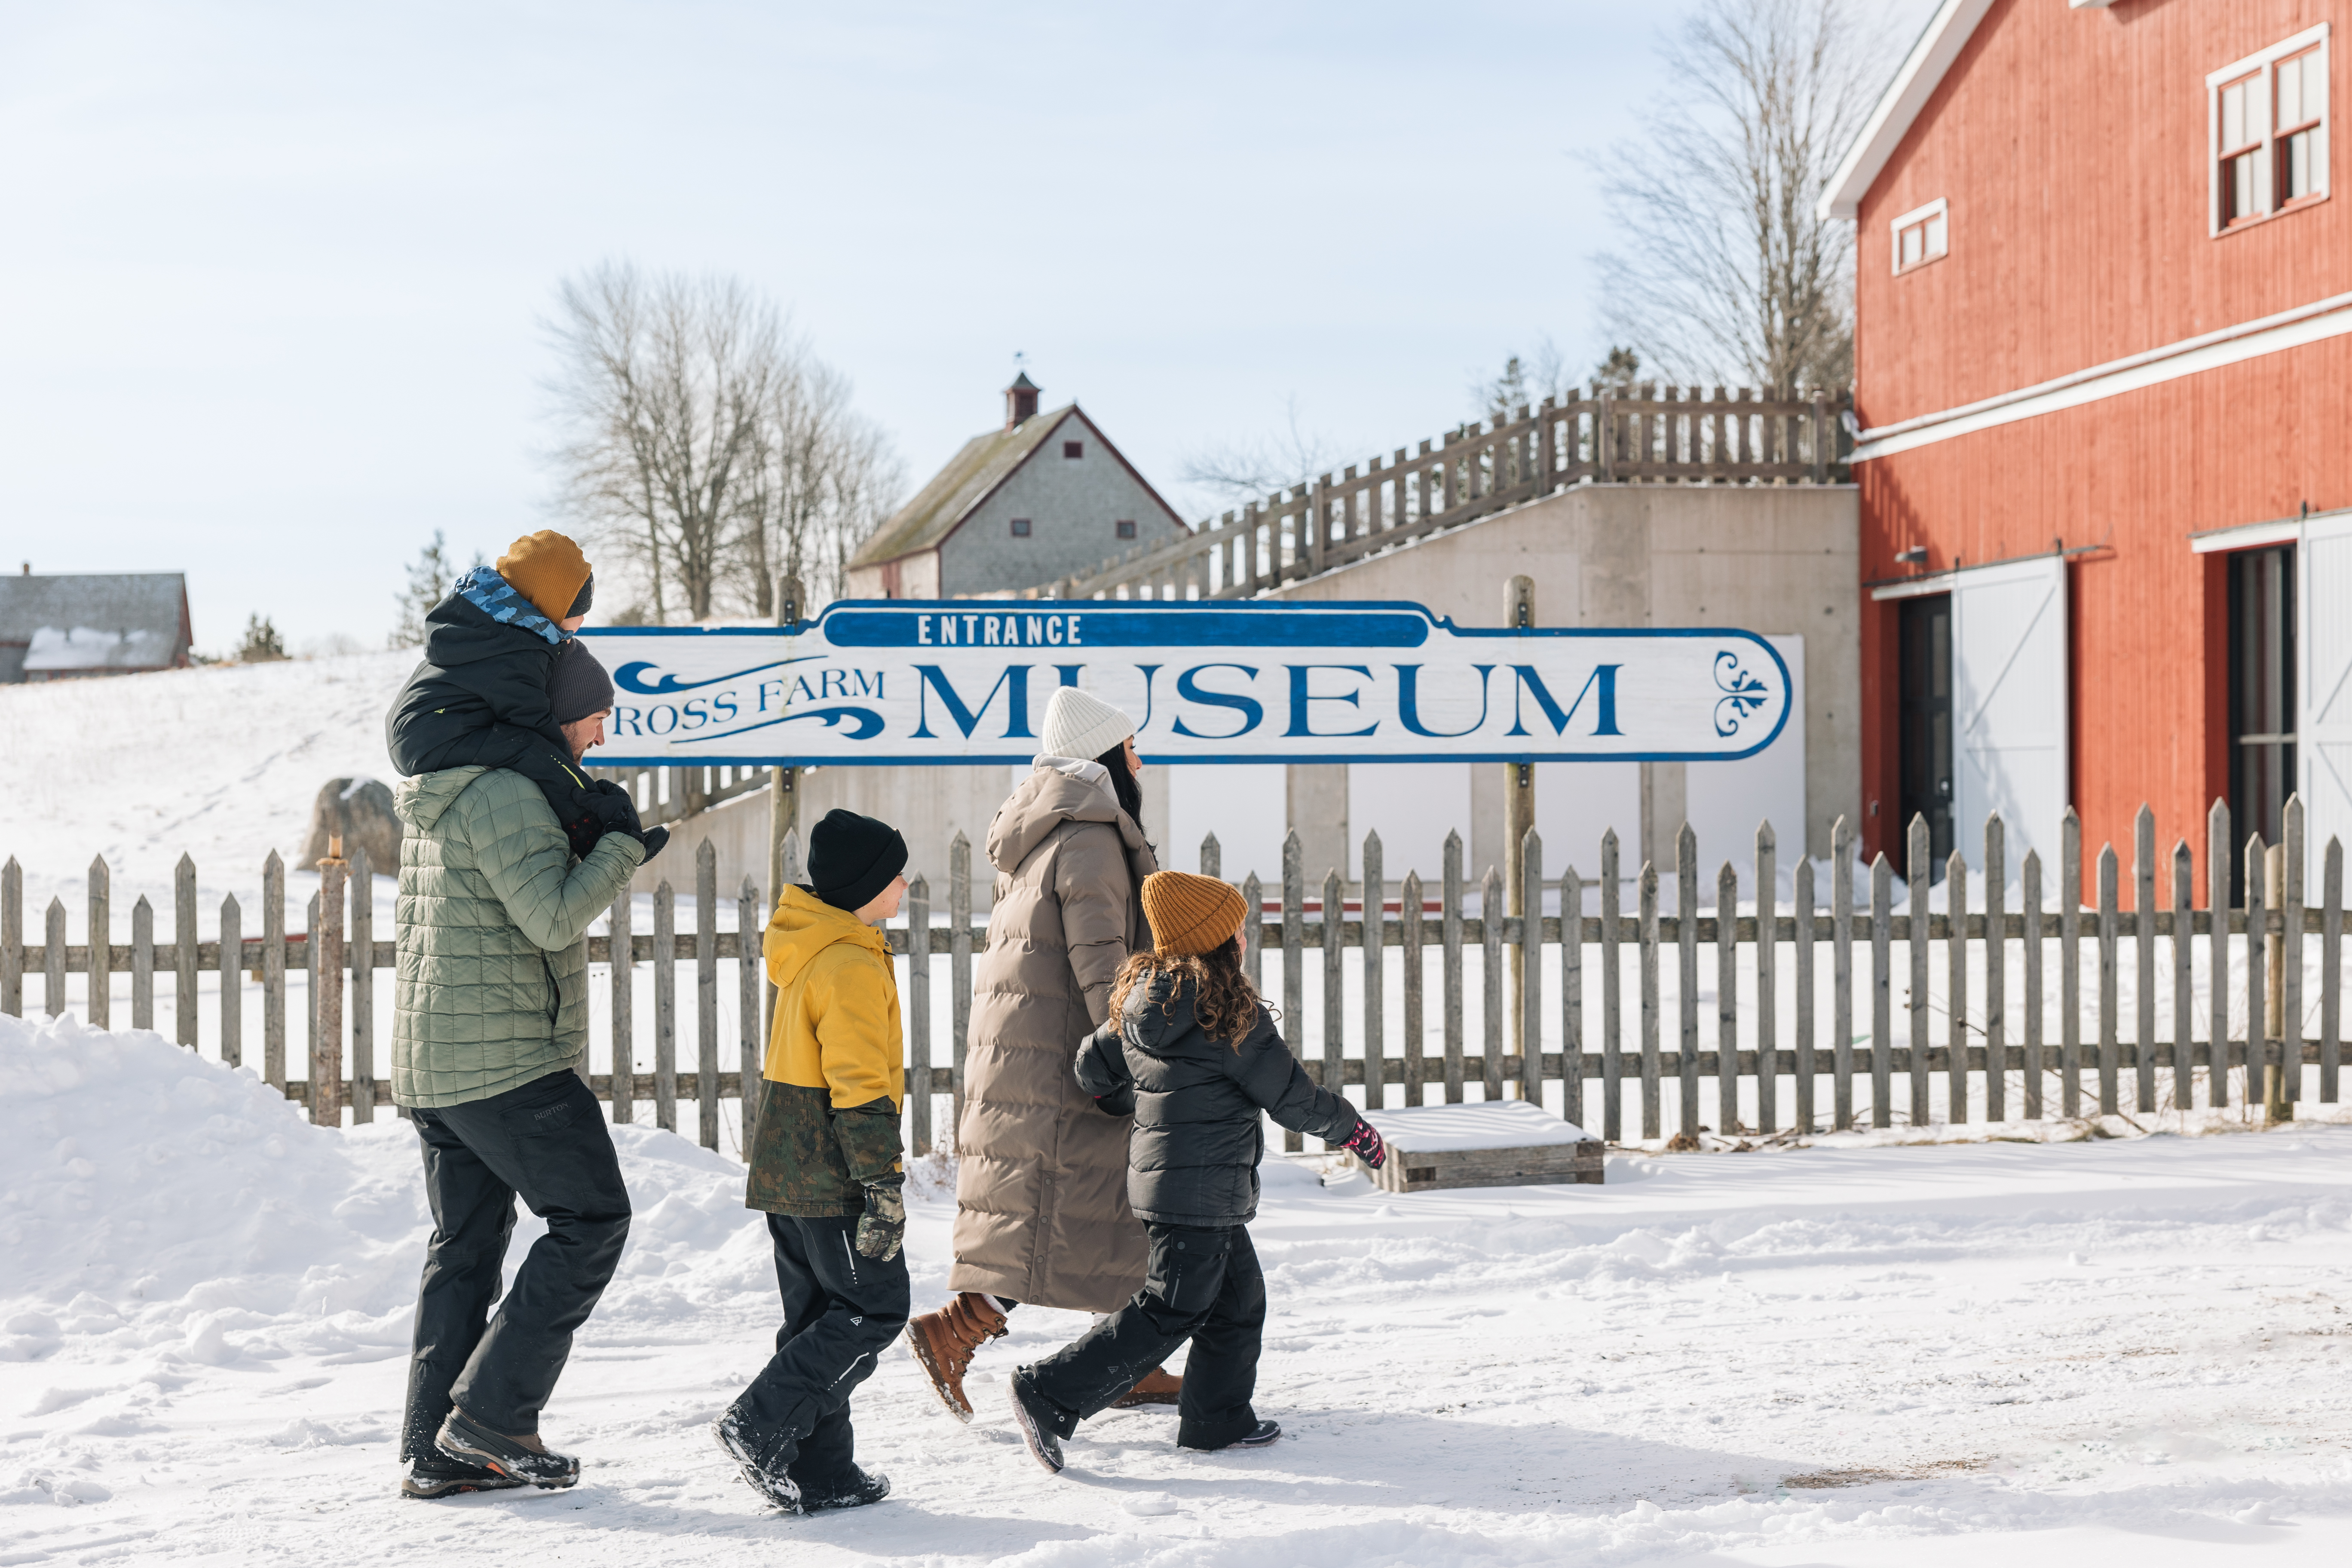 Family of five walking through the snow towards the entrance to Ross Farm with a sign reading "Ross Farm Museum" and a fence behind them.